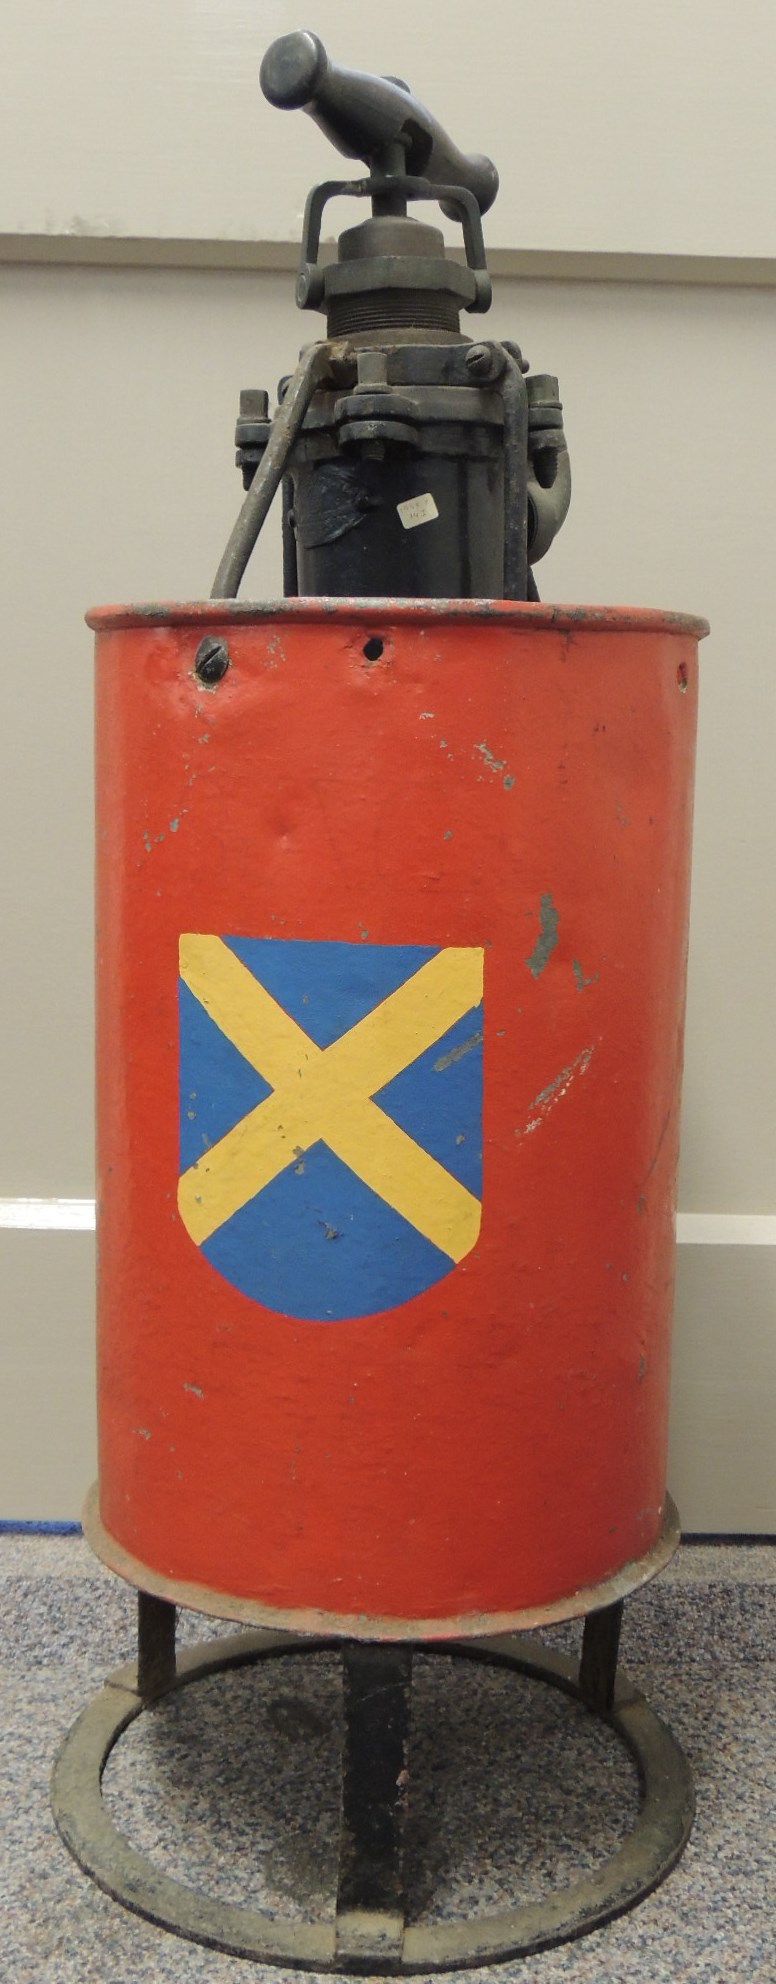 An early St Albans hand operated fire extinguisher the red painted metal "bucket" with St Albans